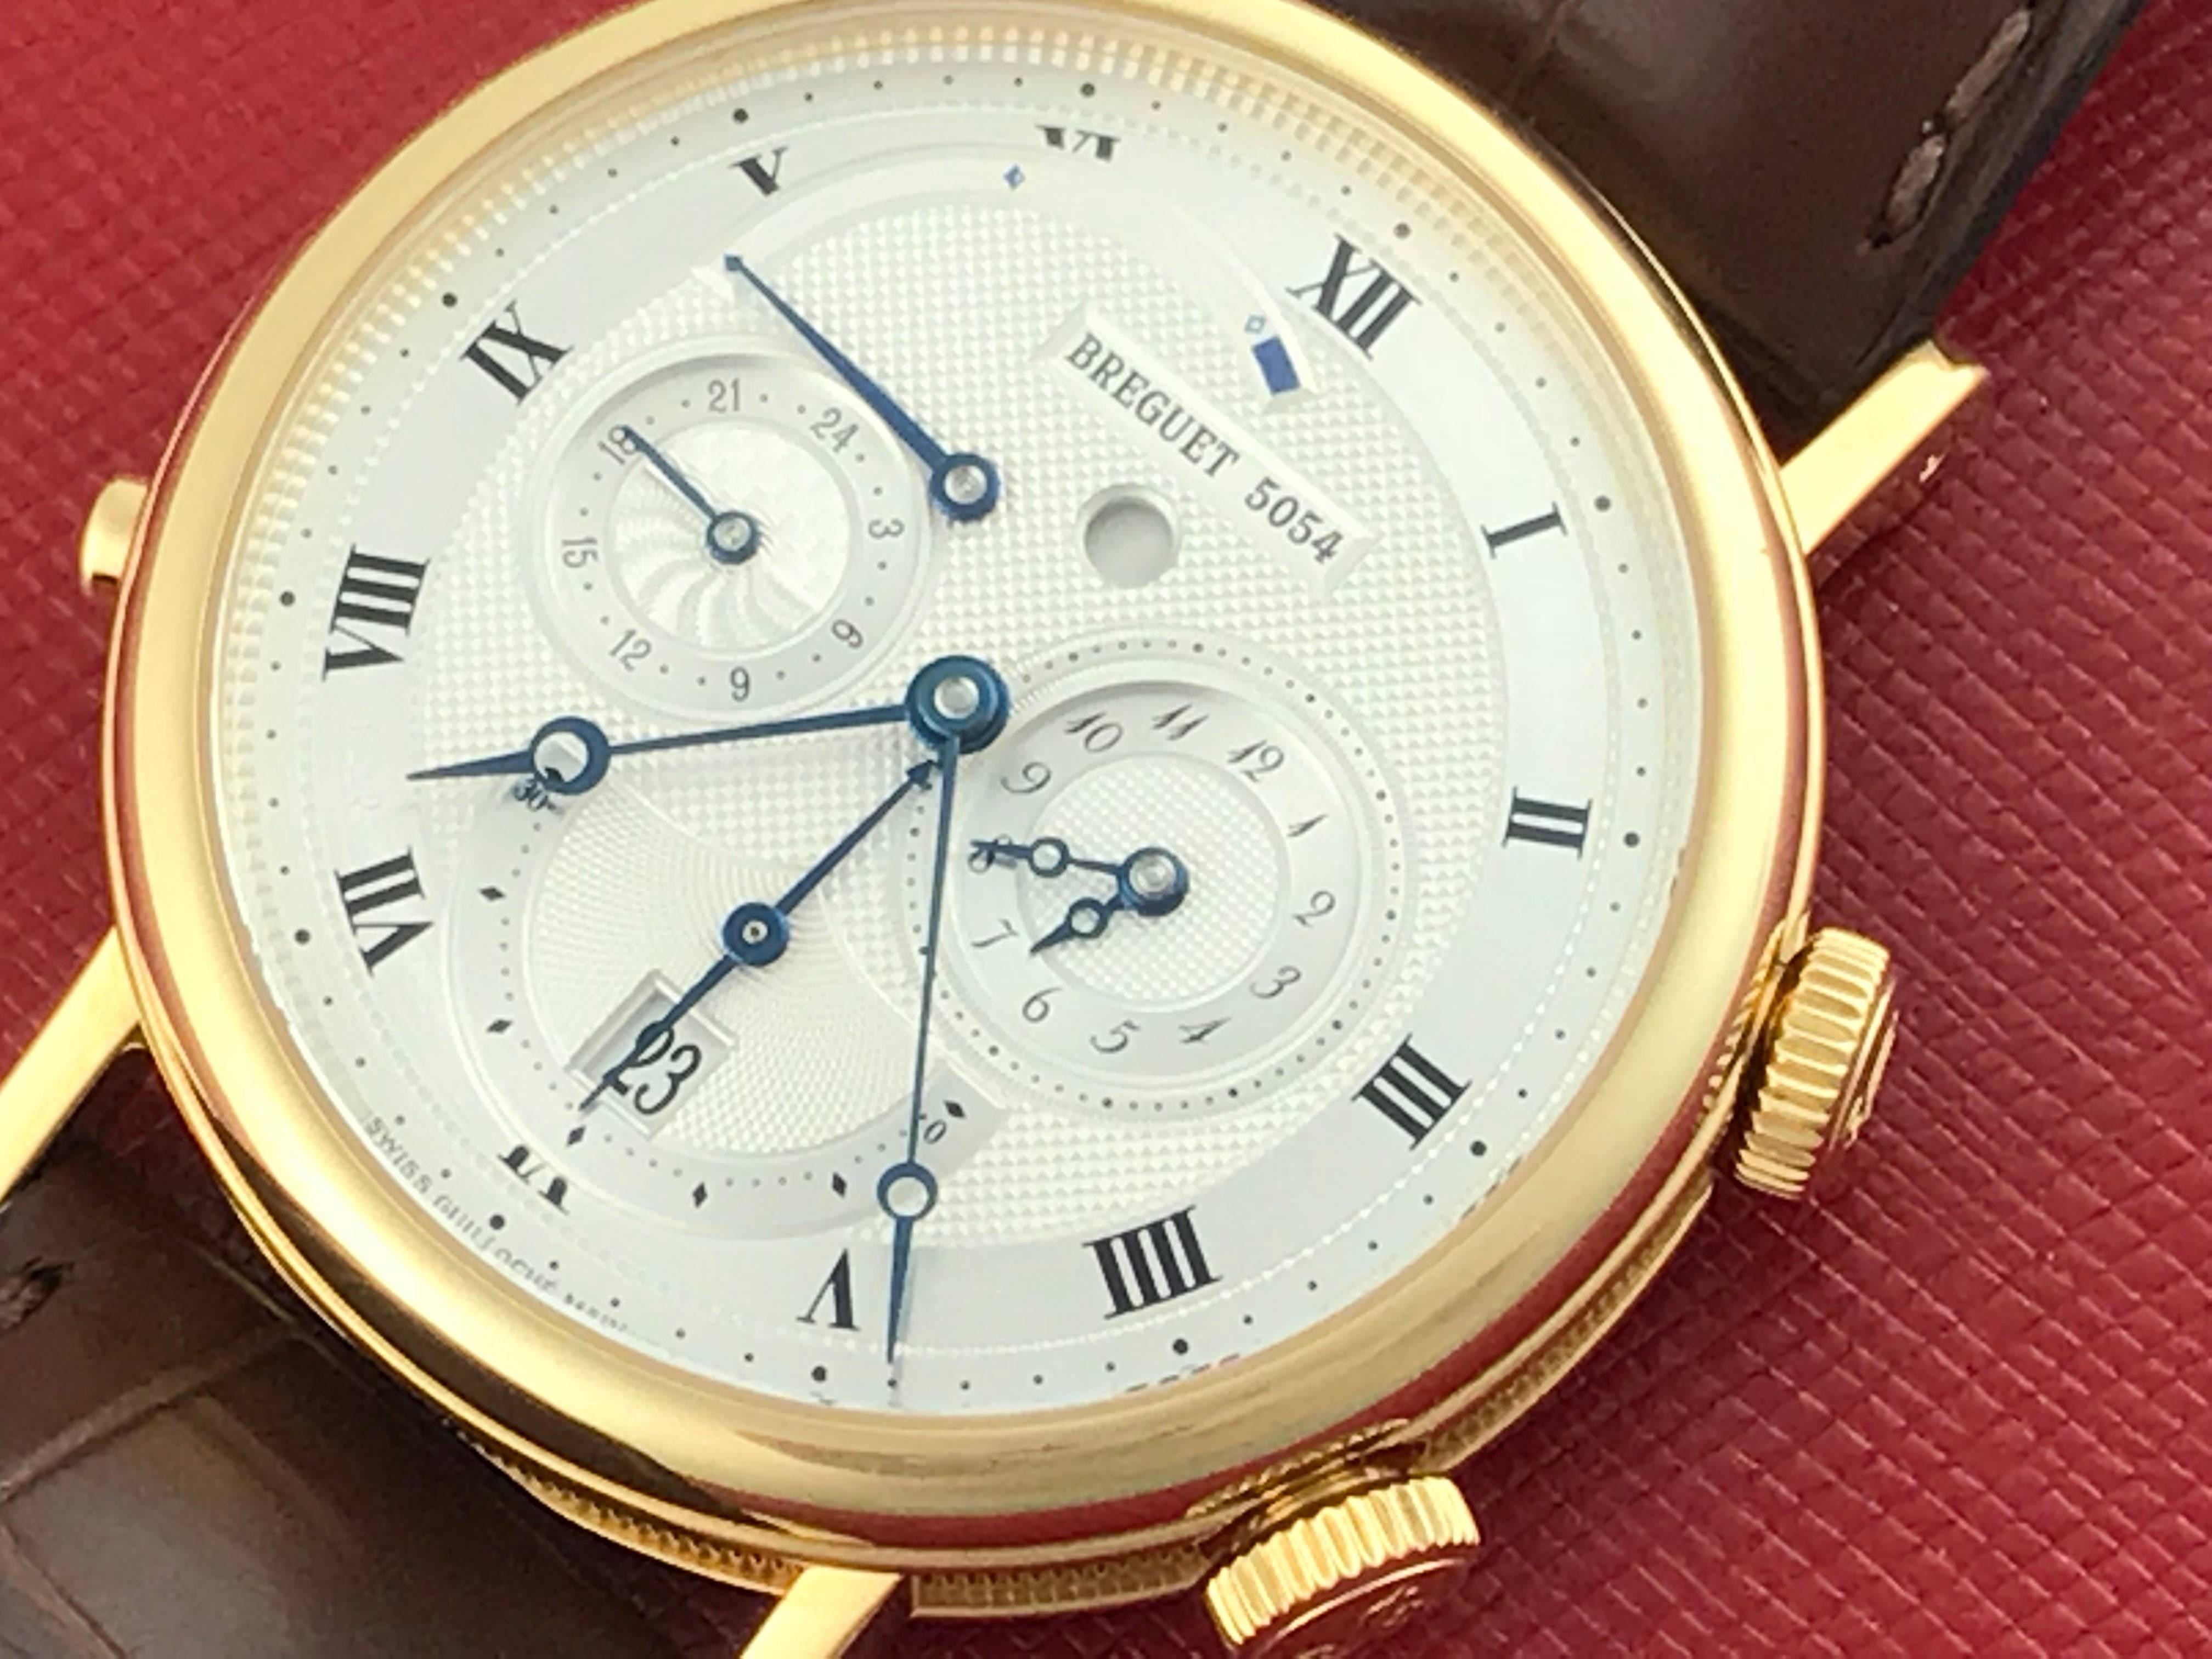 Breguet Classique Model 5707BA/12/9V6 pre-owned men's automatic wrist watch. GMT Alarm; 24 Hour, GMT, Alarm display with Power Reserve Indicator. Tu-tone Silvered textured Dial with black Roman numerals. 18k Yellow Gold round style case with